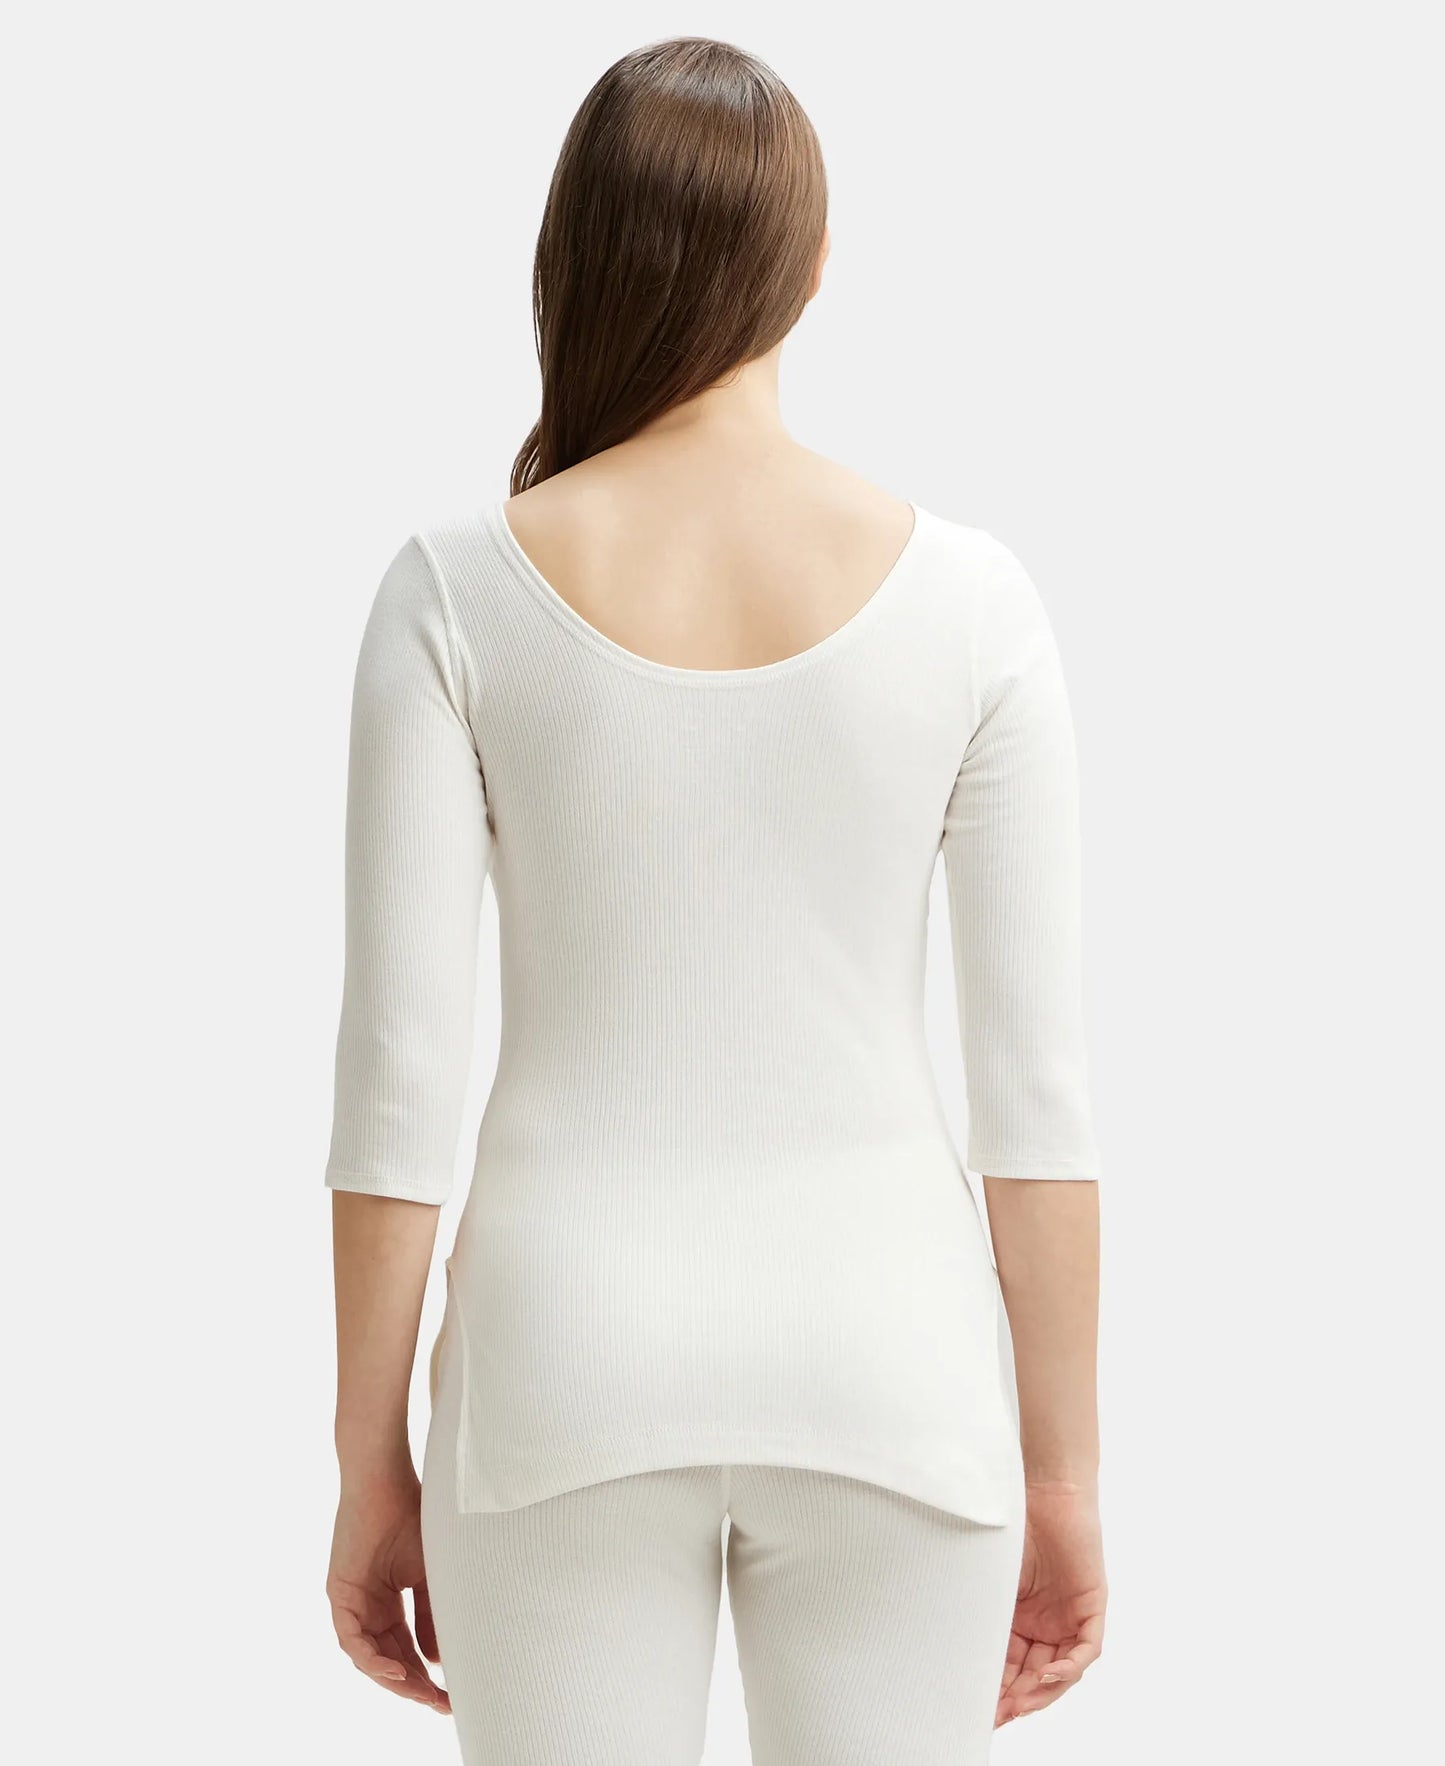 Super Combed Cotton Rich Three Quarter Sleeve Thermal Top with StayWarm Technology - Off White-3